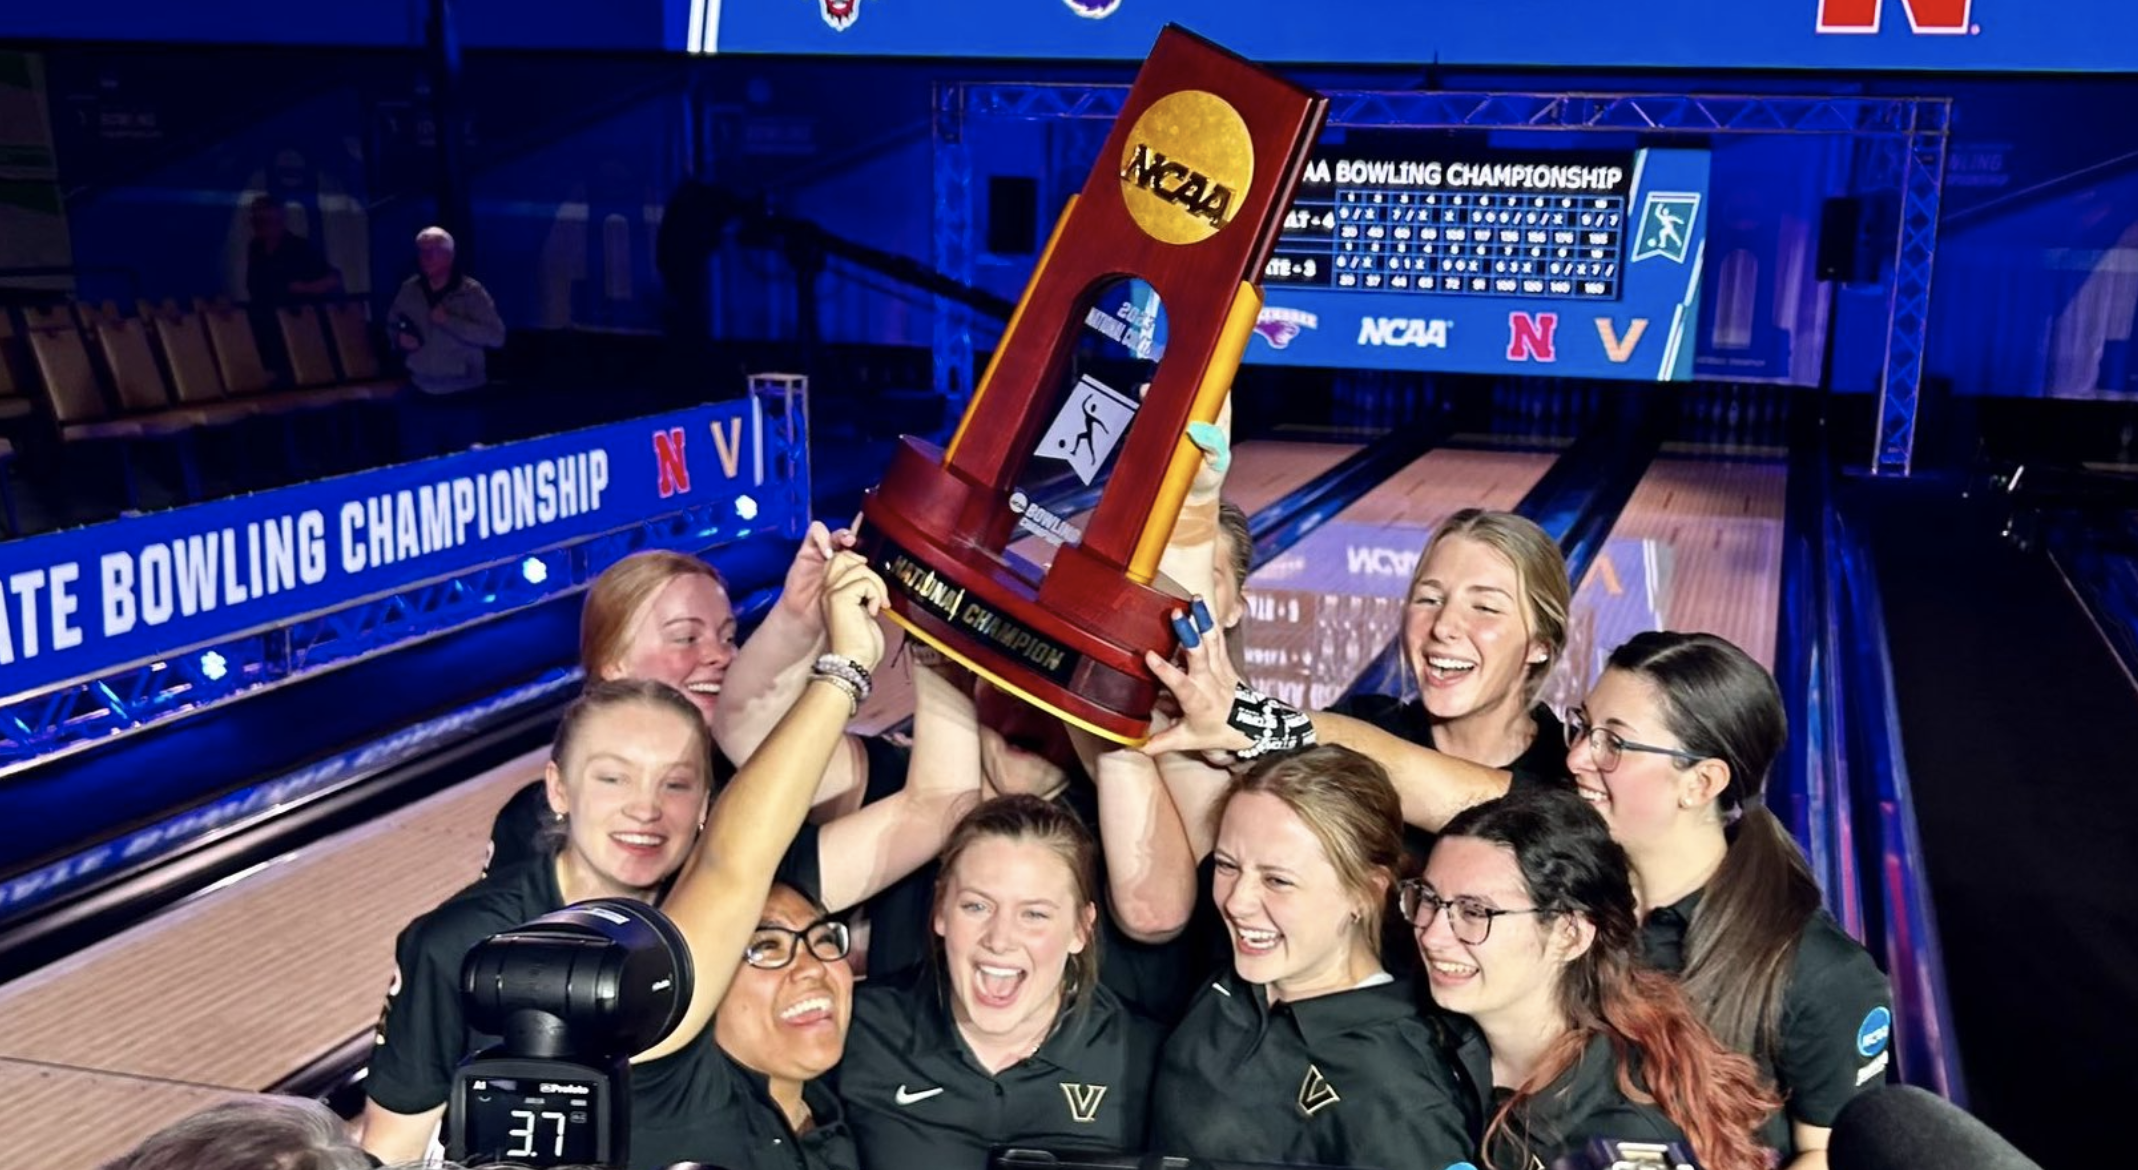 The Vanderbilt bowling team erased a 3-1 deficit and defeated Arkansas State April 15 in Las Vegas to win the 2023 national championship.